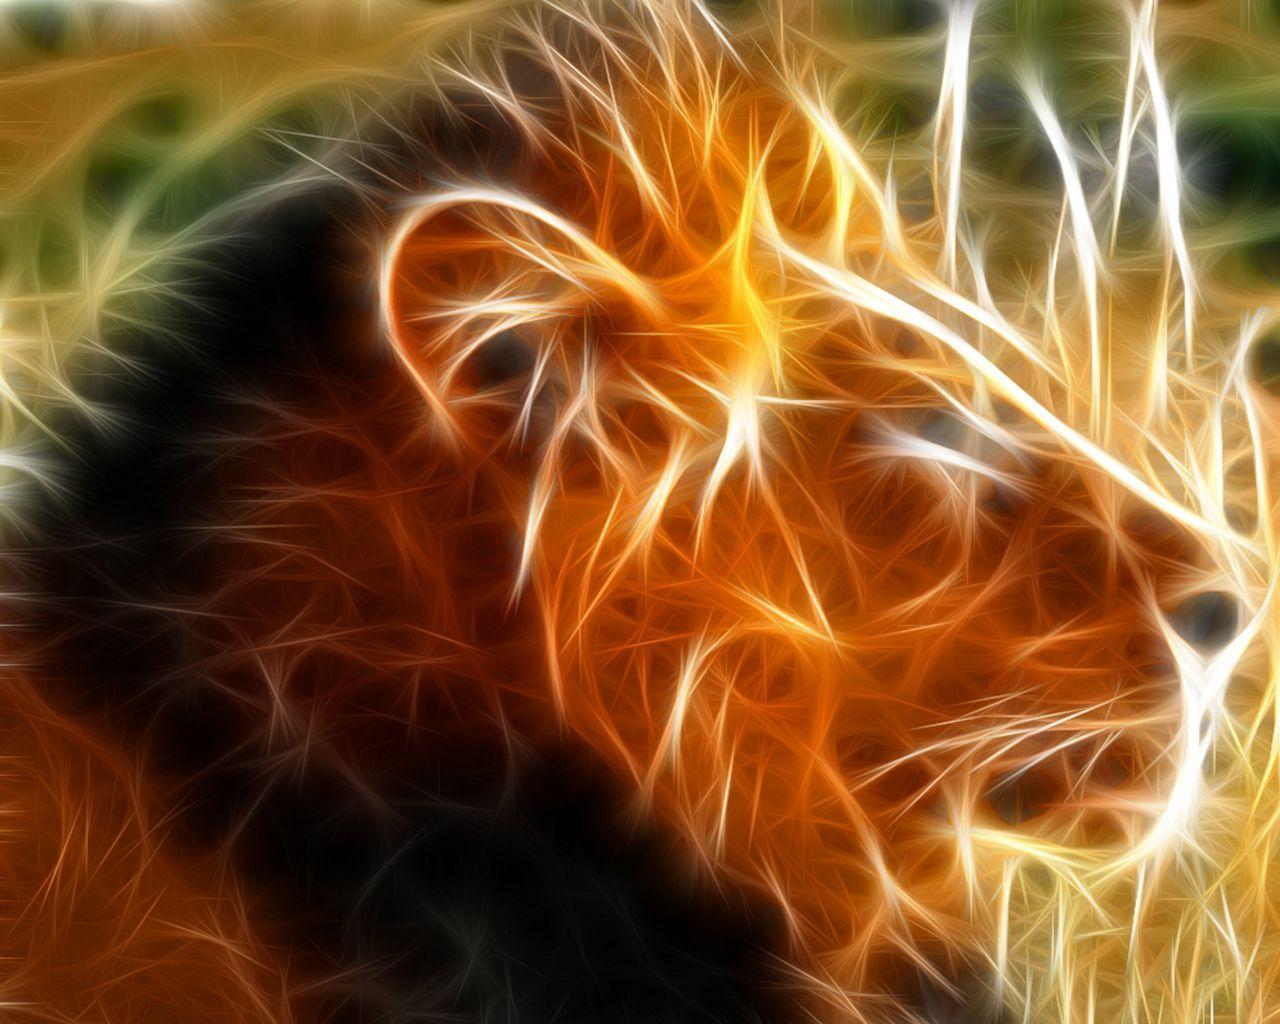 Liond Lion 7 Wallpaper.org. Amimales